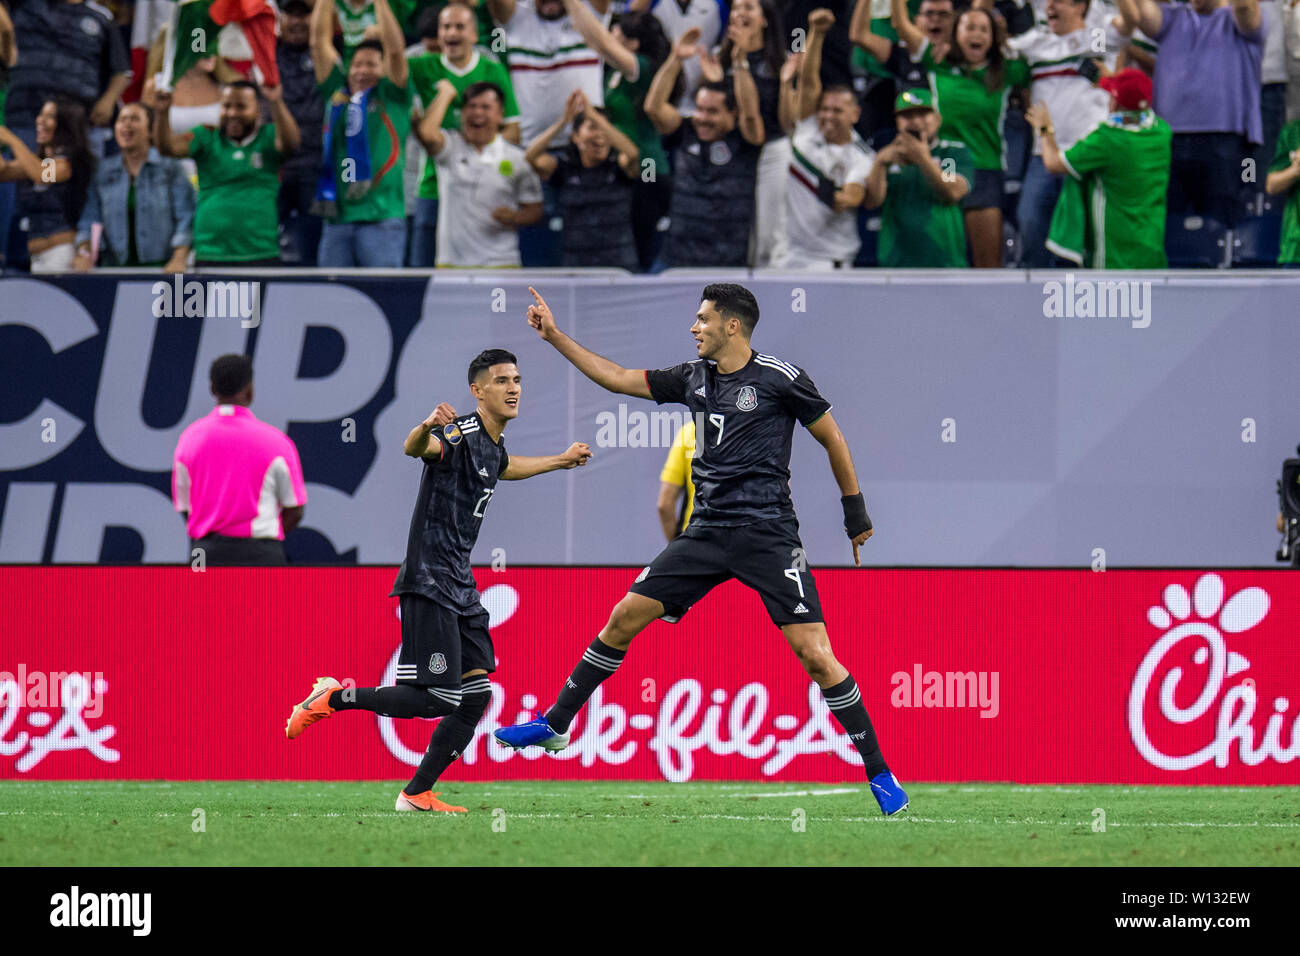 Houston, TX, USA. 29th June, 2019. Mexico forward Raul Jimenez (9) celebrates his goal during the 1st half of a CONCACAF Gold Cup quarterfinals soccer match between Costa Rica and Mexico at NRG Stadium in Houston, TX. Trask Smith/CSM/Alamy Live News Stock Photo